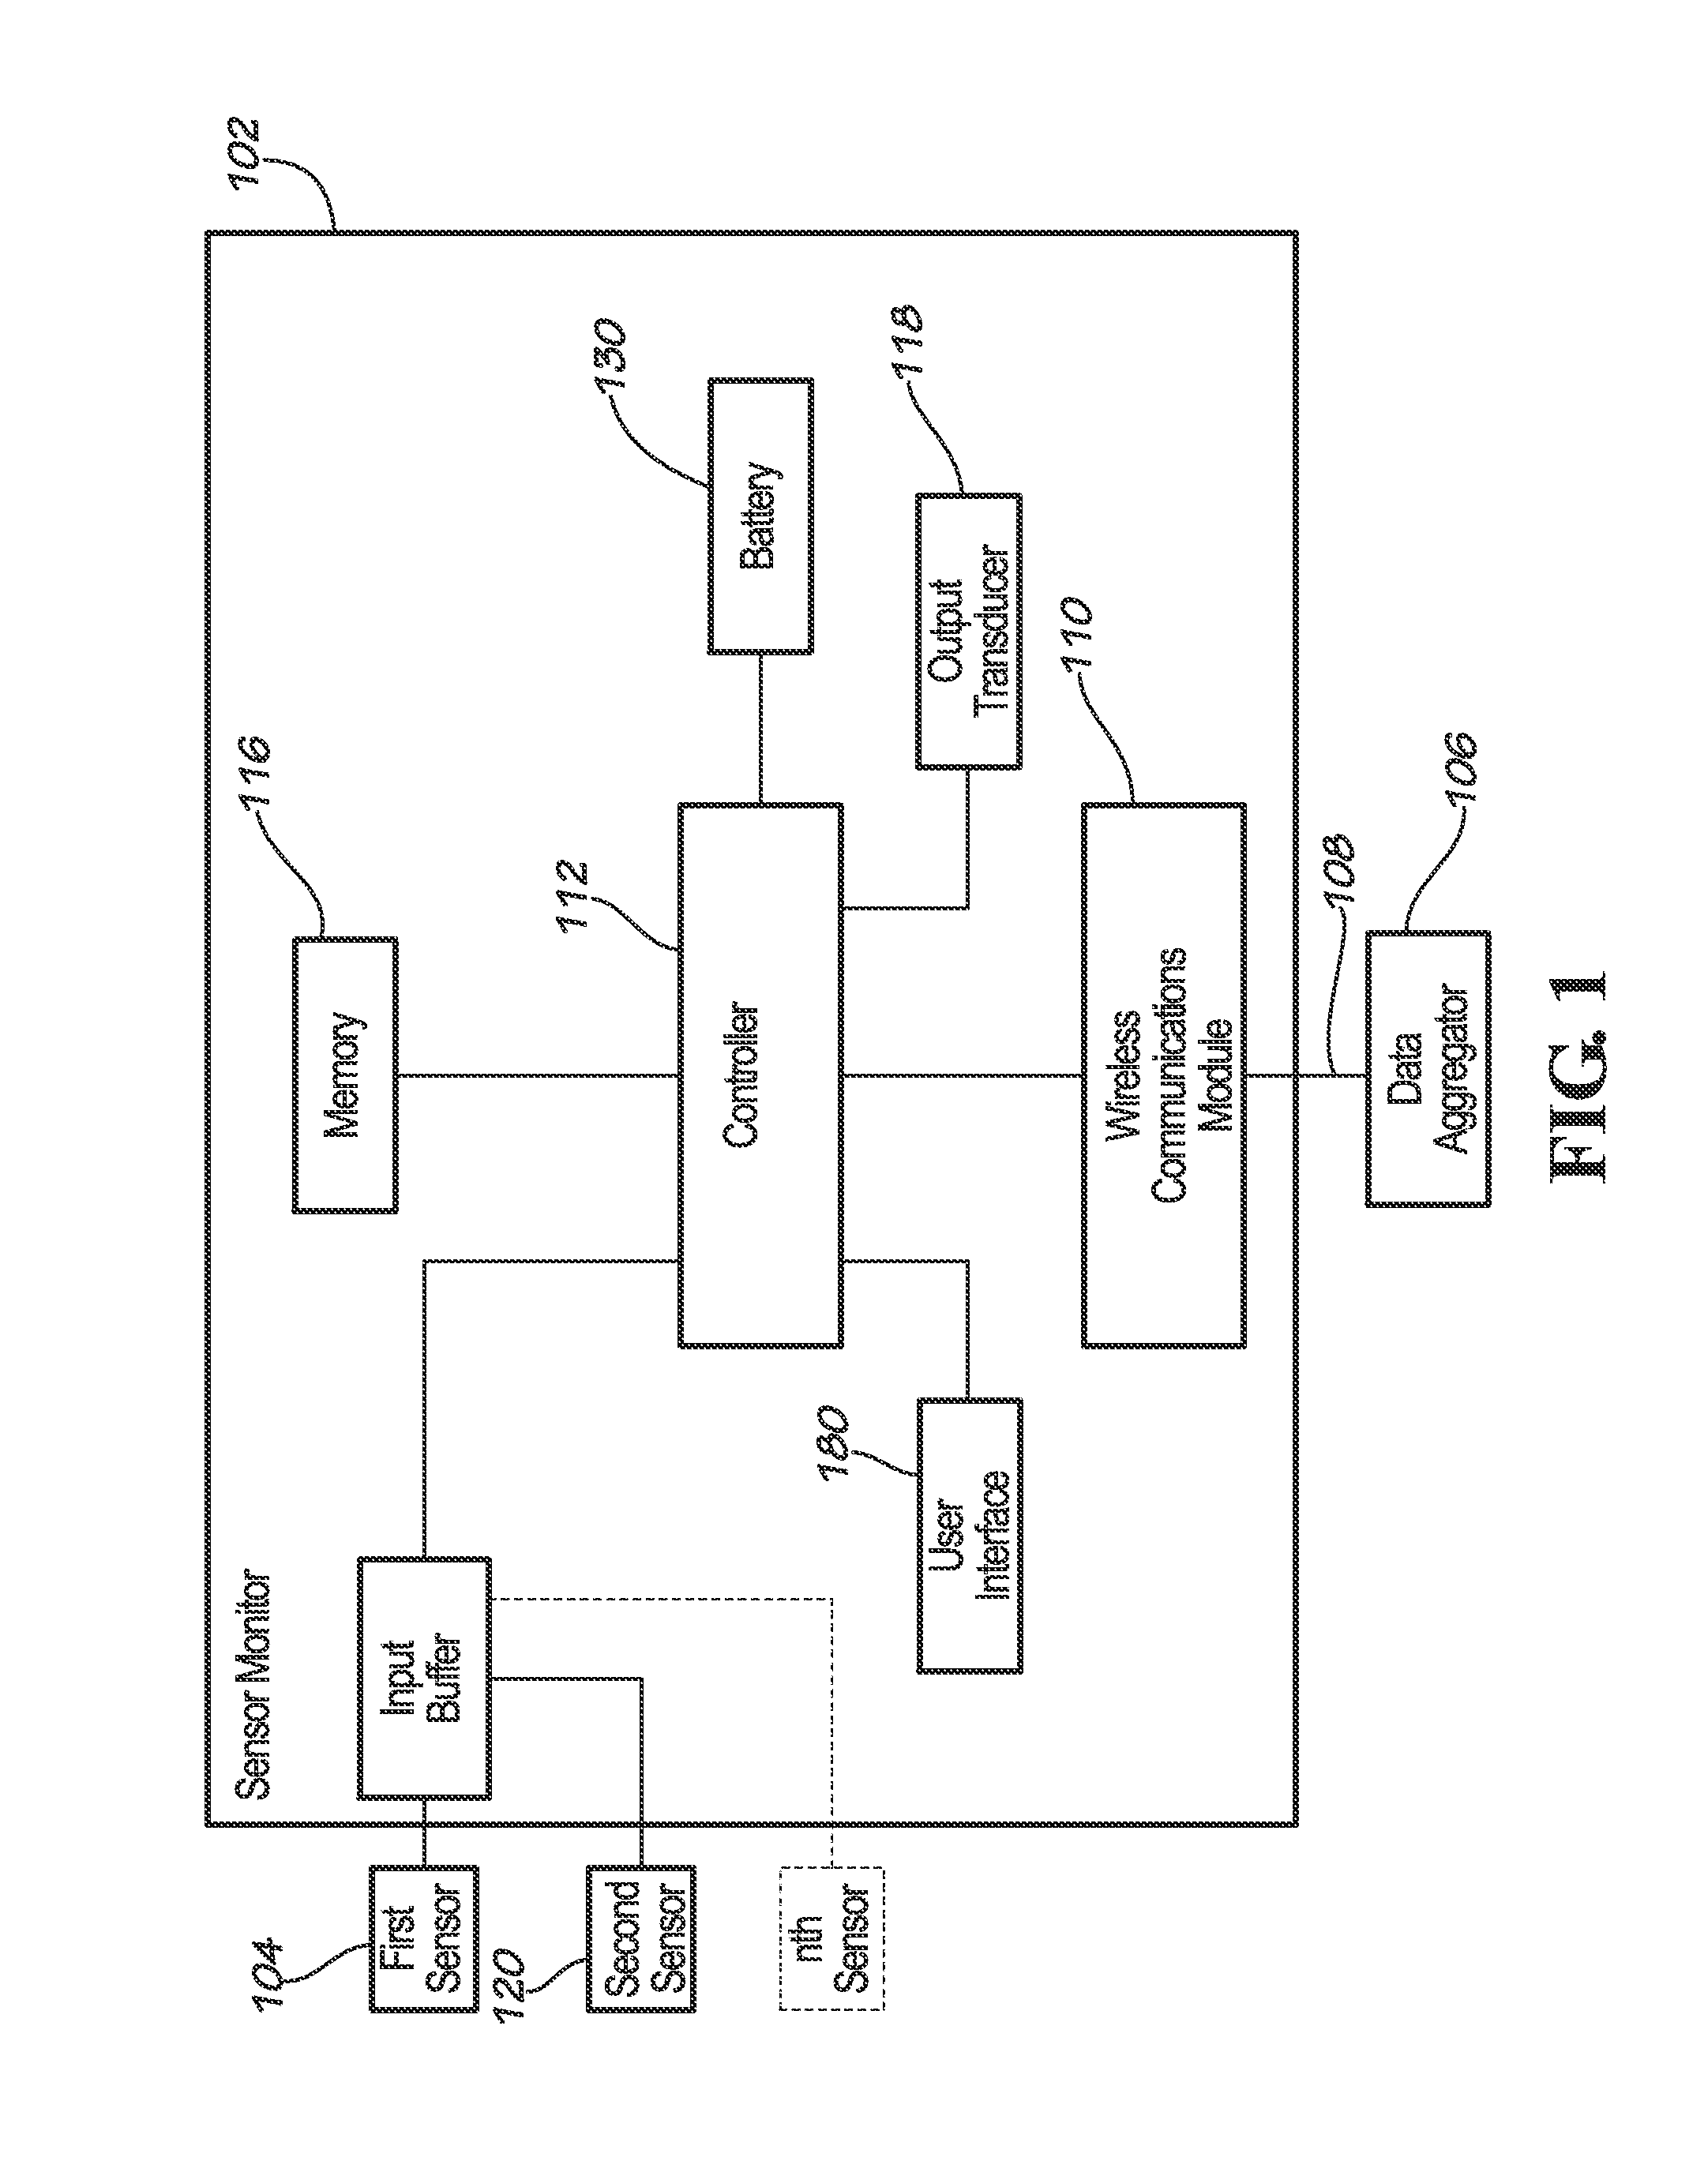 Intelligent sensor for an automated inspection system